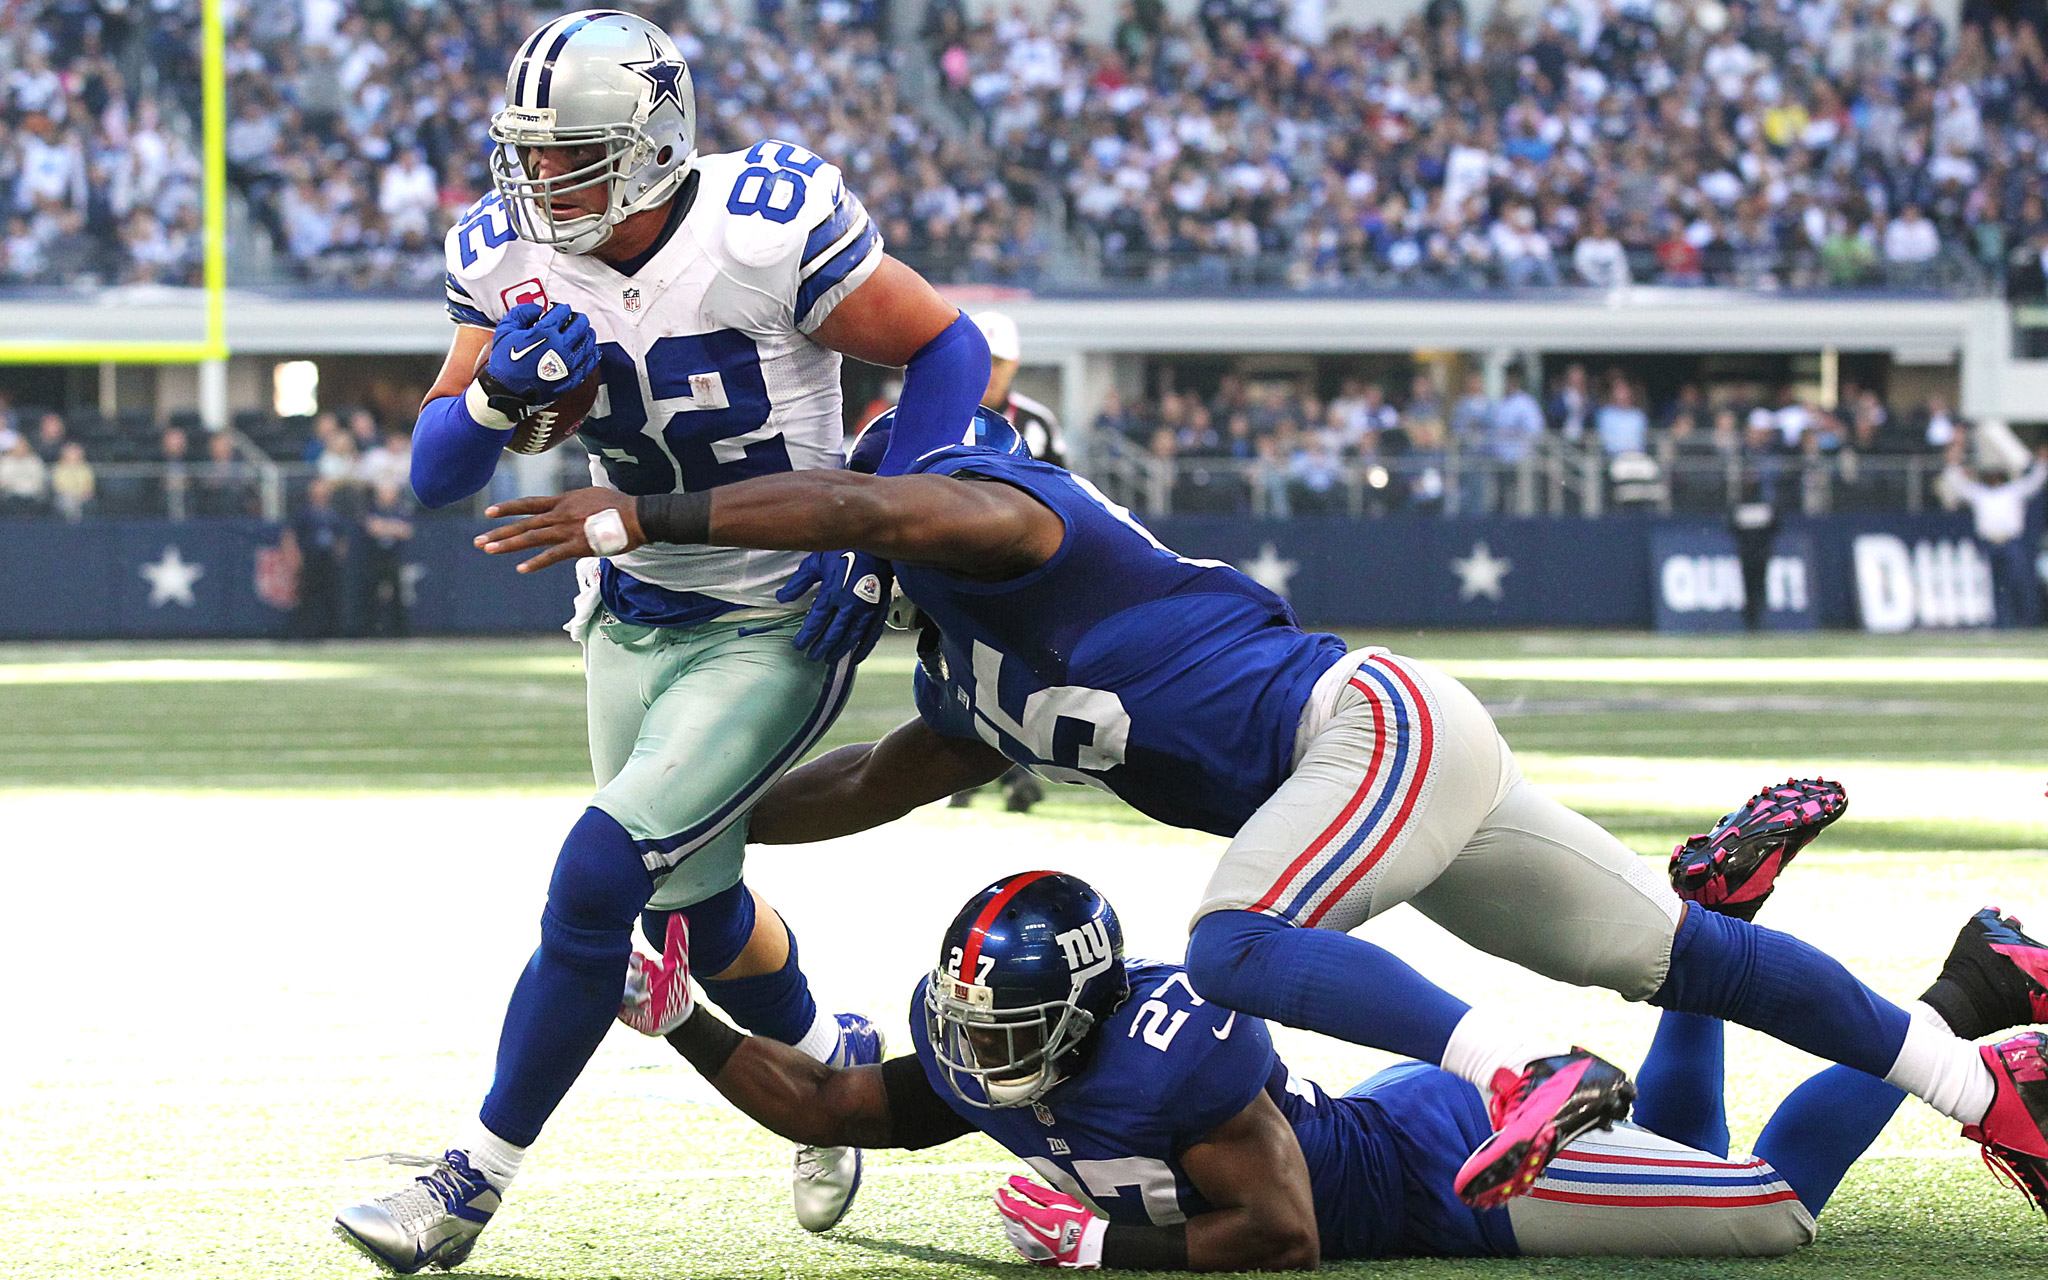 Cowboys Blog - Rapid Reactions: Romo finds Witten to Improve to 1-0 1